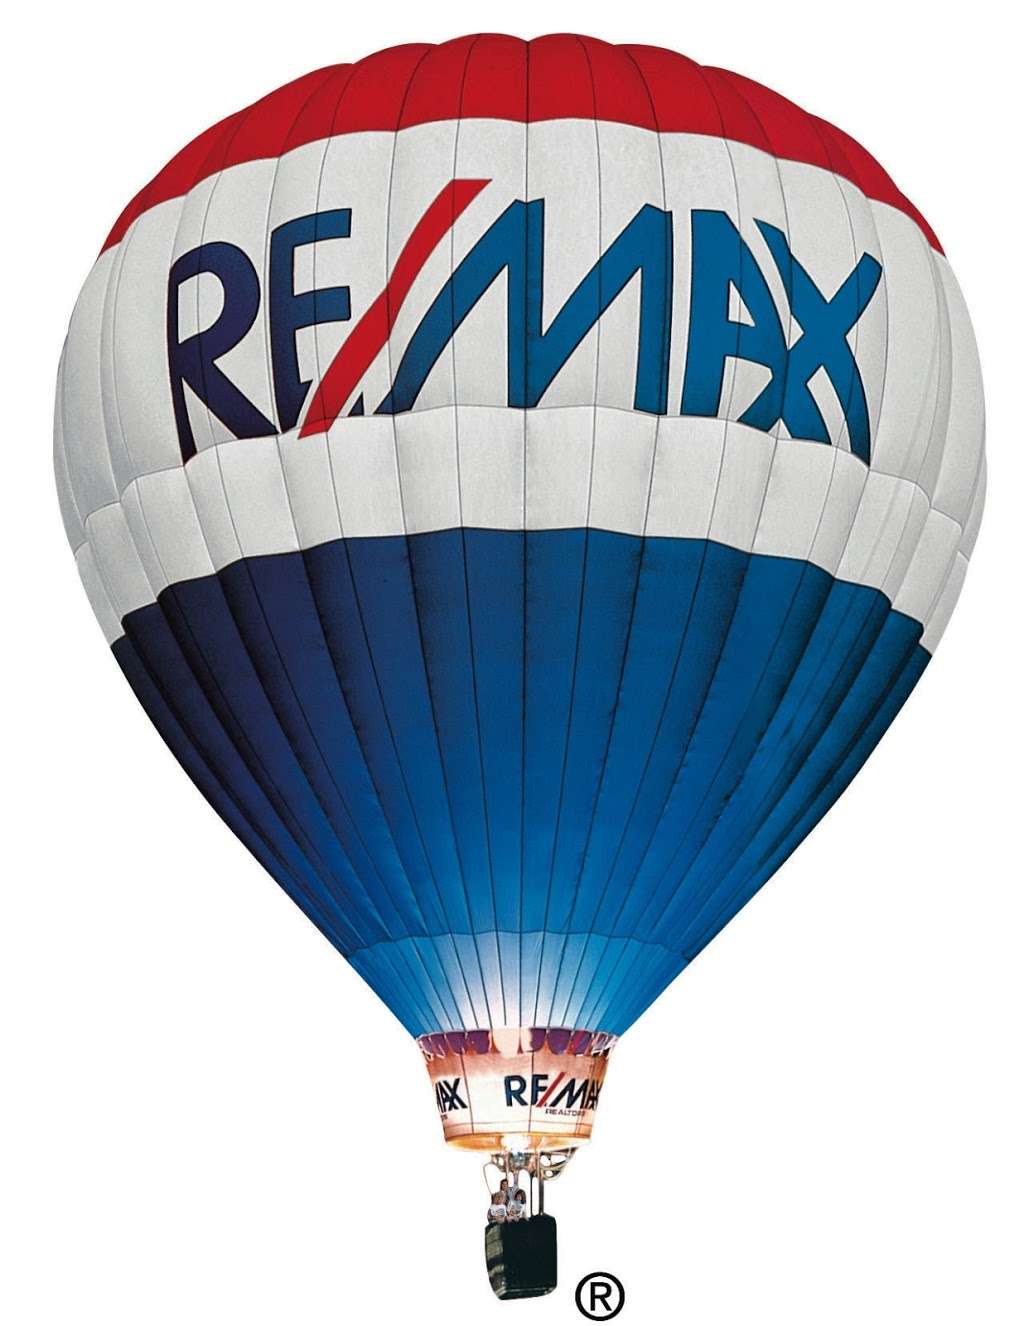 REMAX Renaissance | 4 Lowell Rd #5, North Reading, MA 01864, USA | Phone: (978) 664-3000